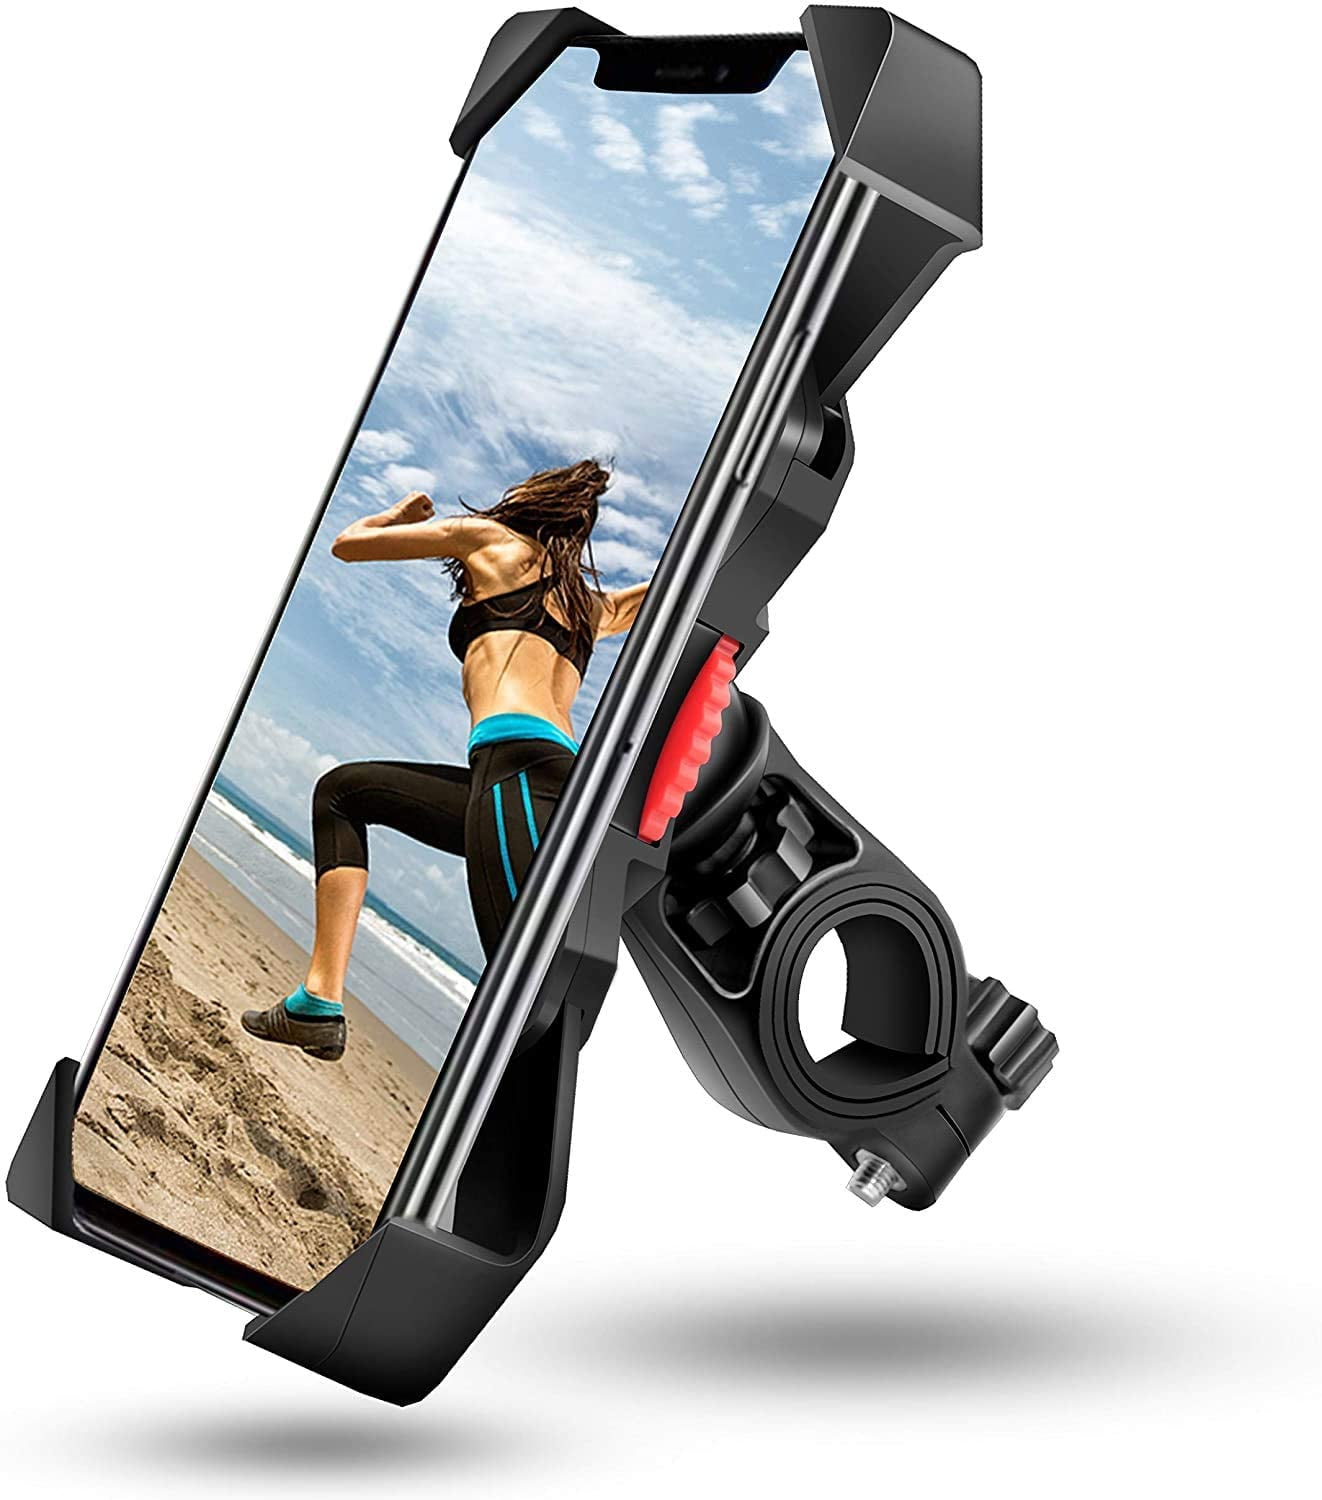 Details about   Cell Phone Mount Holder GPS Motorcycle MTB Bicycle 360 Rotation Universal